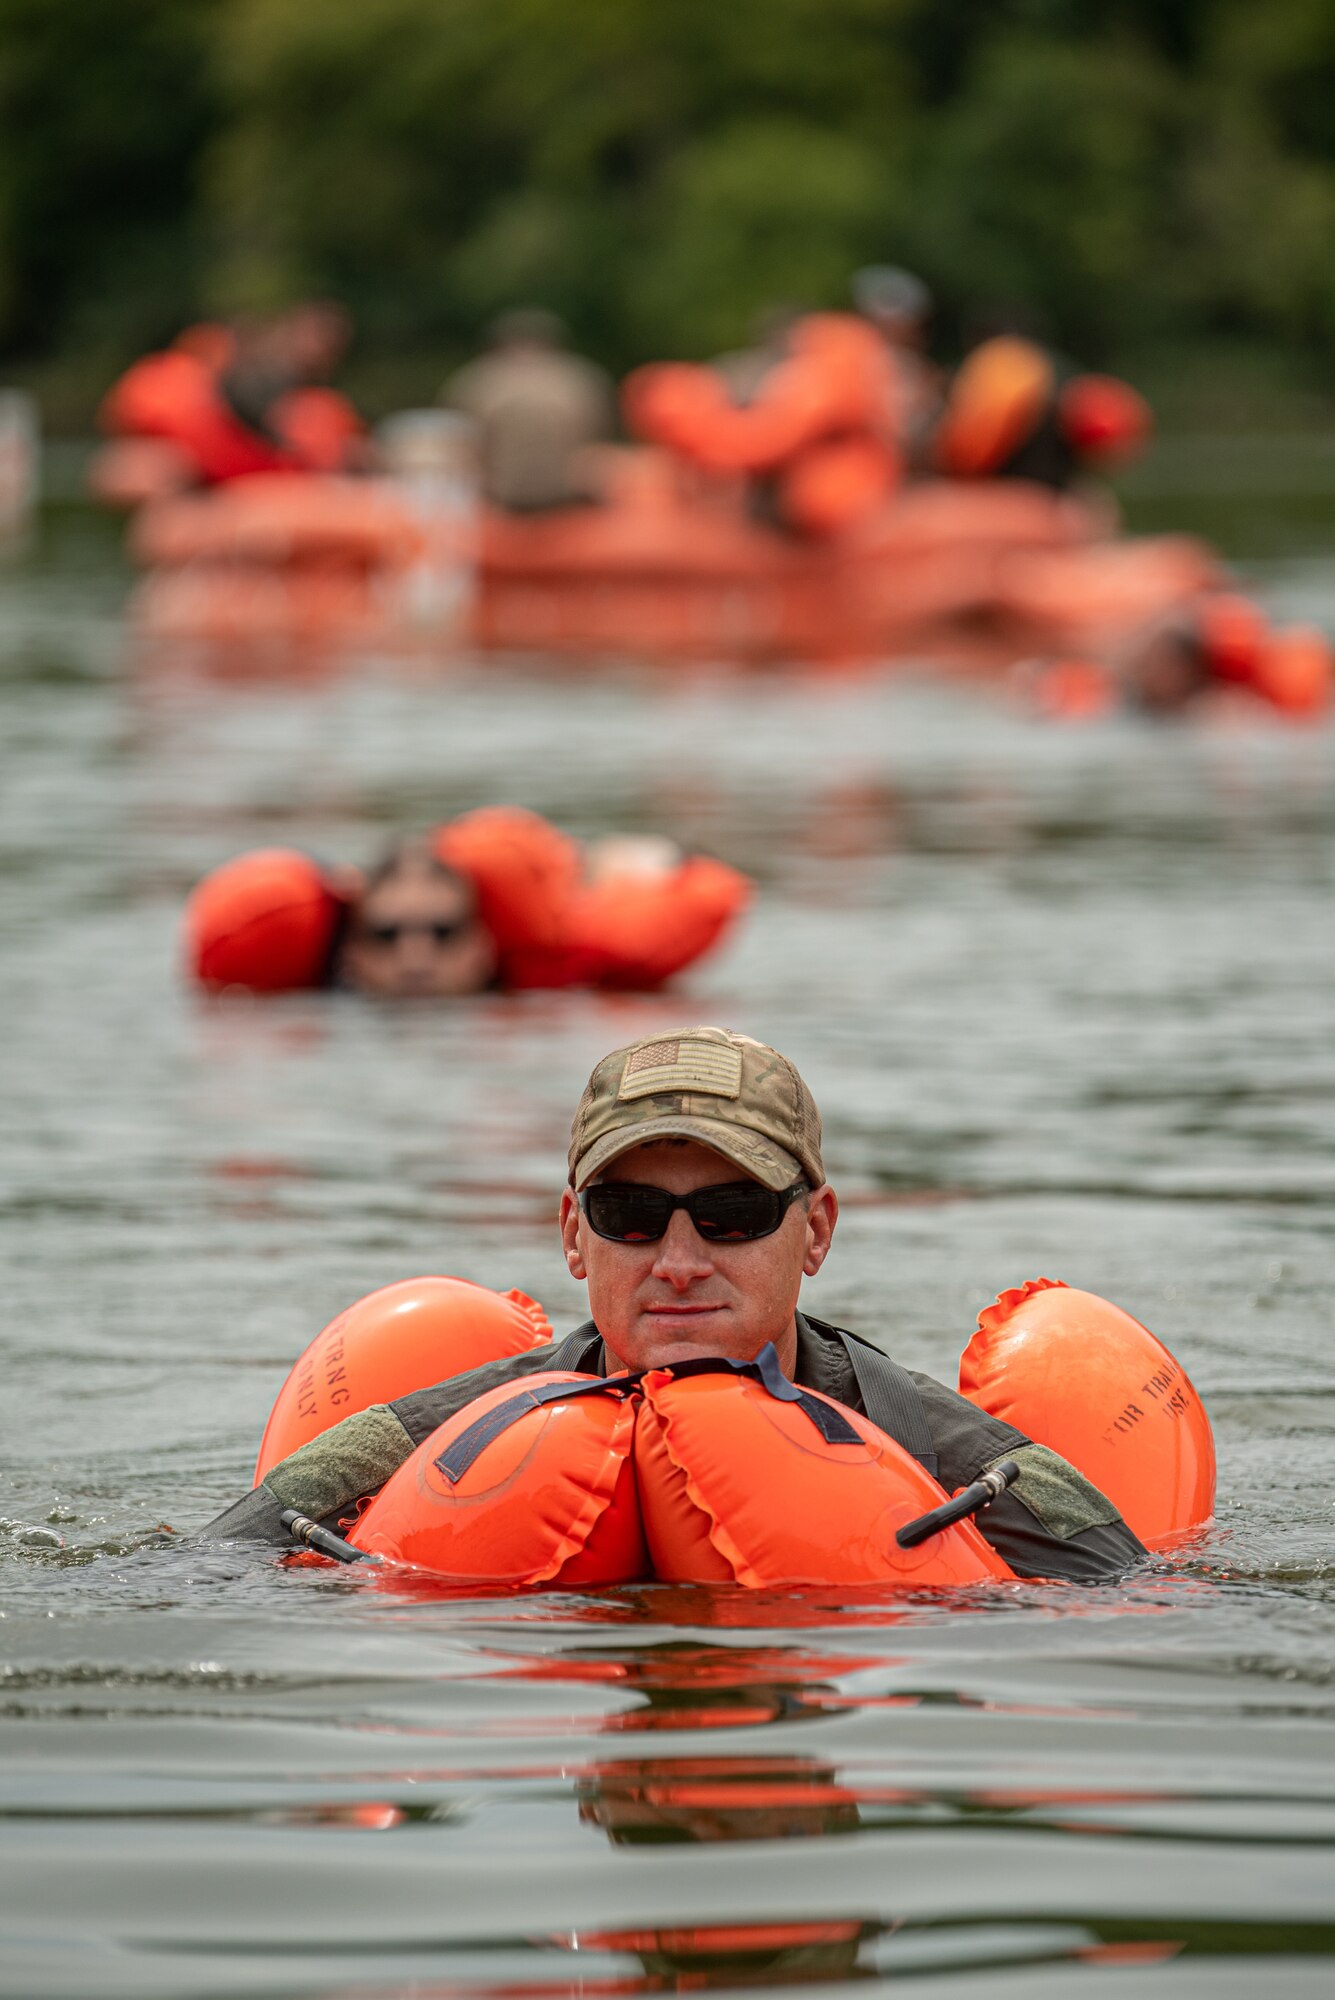 Chief Master Sgt. Bradley Simms, a loadmaster for the Kentucky Air National Guard’s 165th Airlift Squadron, swims back to shore after exiting an F2B life raft during water survival training at Taylorsville Lake in Spencer County, Ky., Sept. 10, 2022. The annual training refreshes aircrew members on skills learned during U.S. Air Force Survival School. (U.S. Air National Guard photo by Tech. Sgt. Joshua Horton)